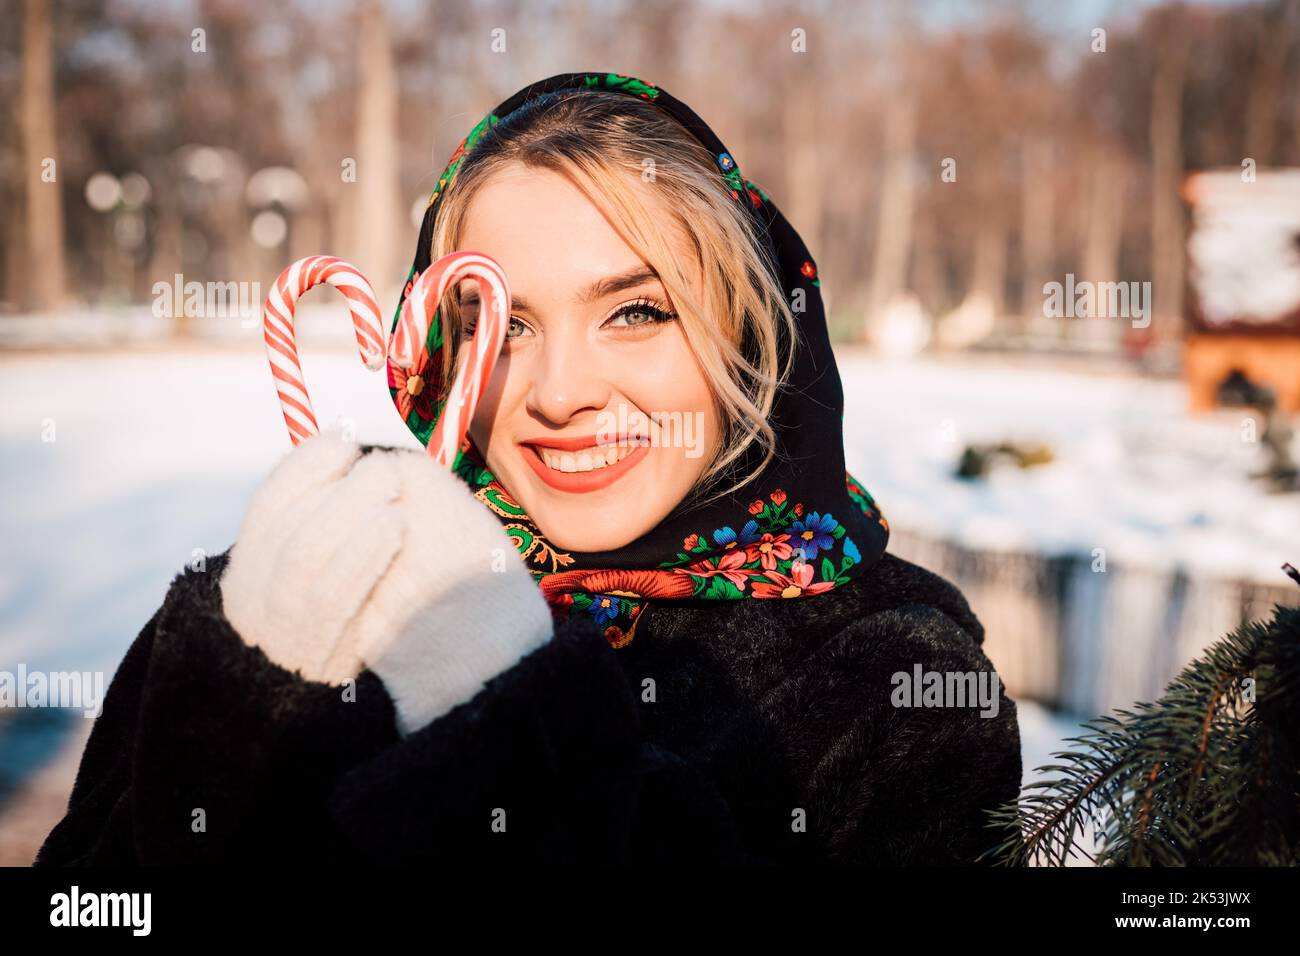 A young beautiful woman in a national Slavic headscarf with lollipops Stock Photo